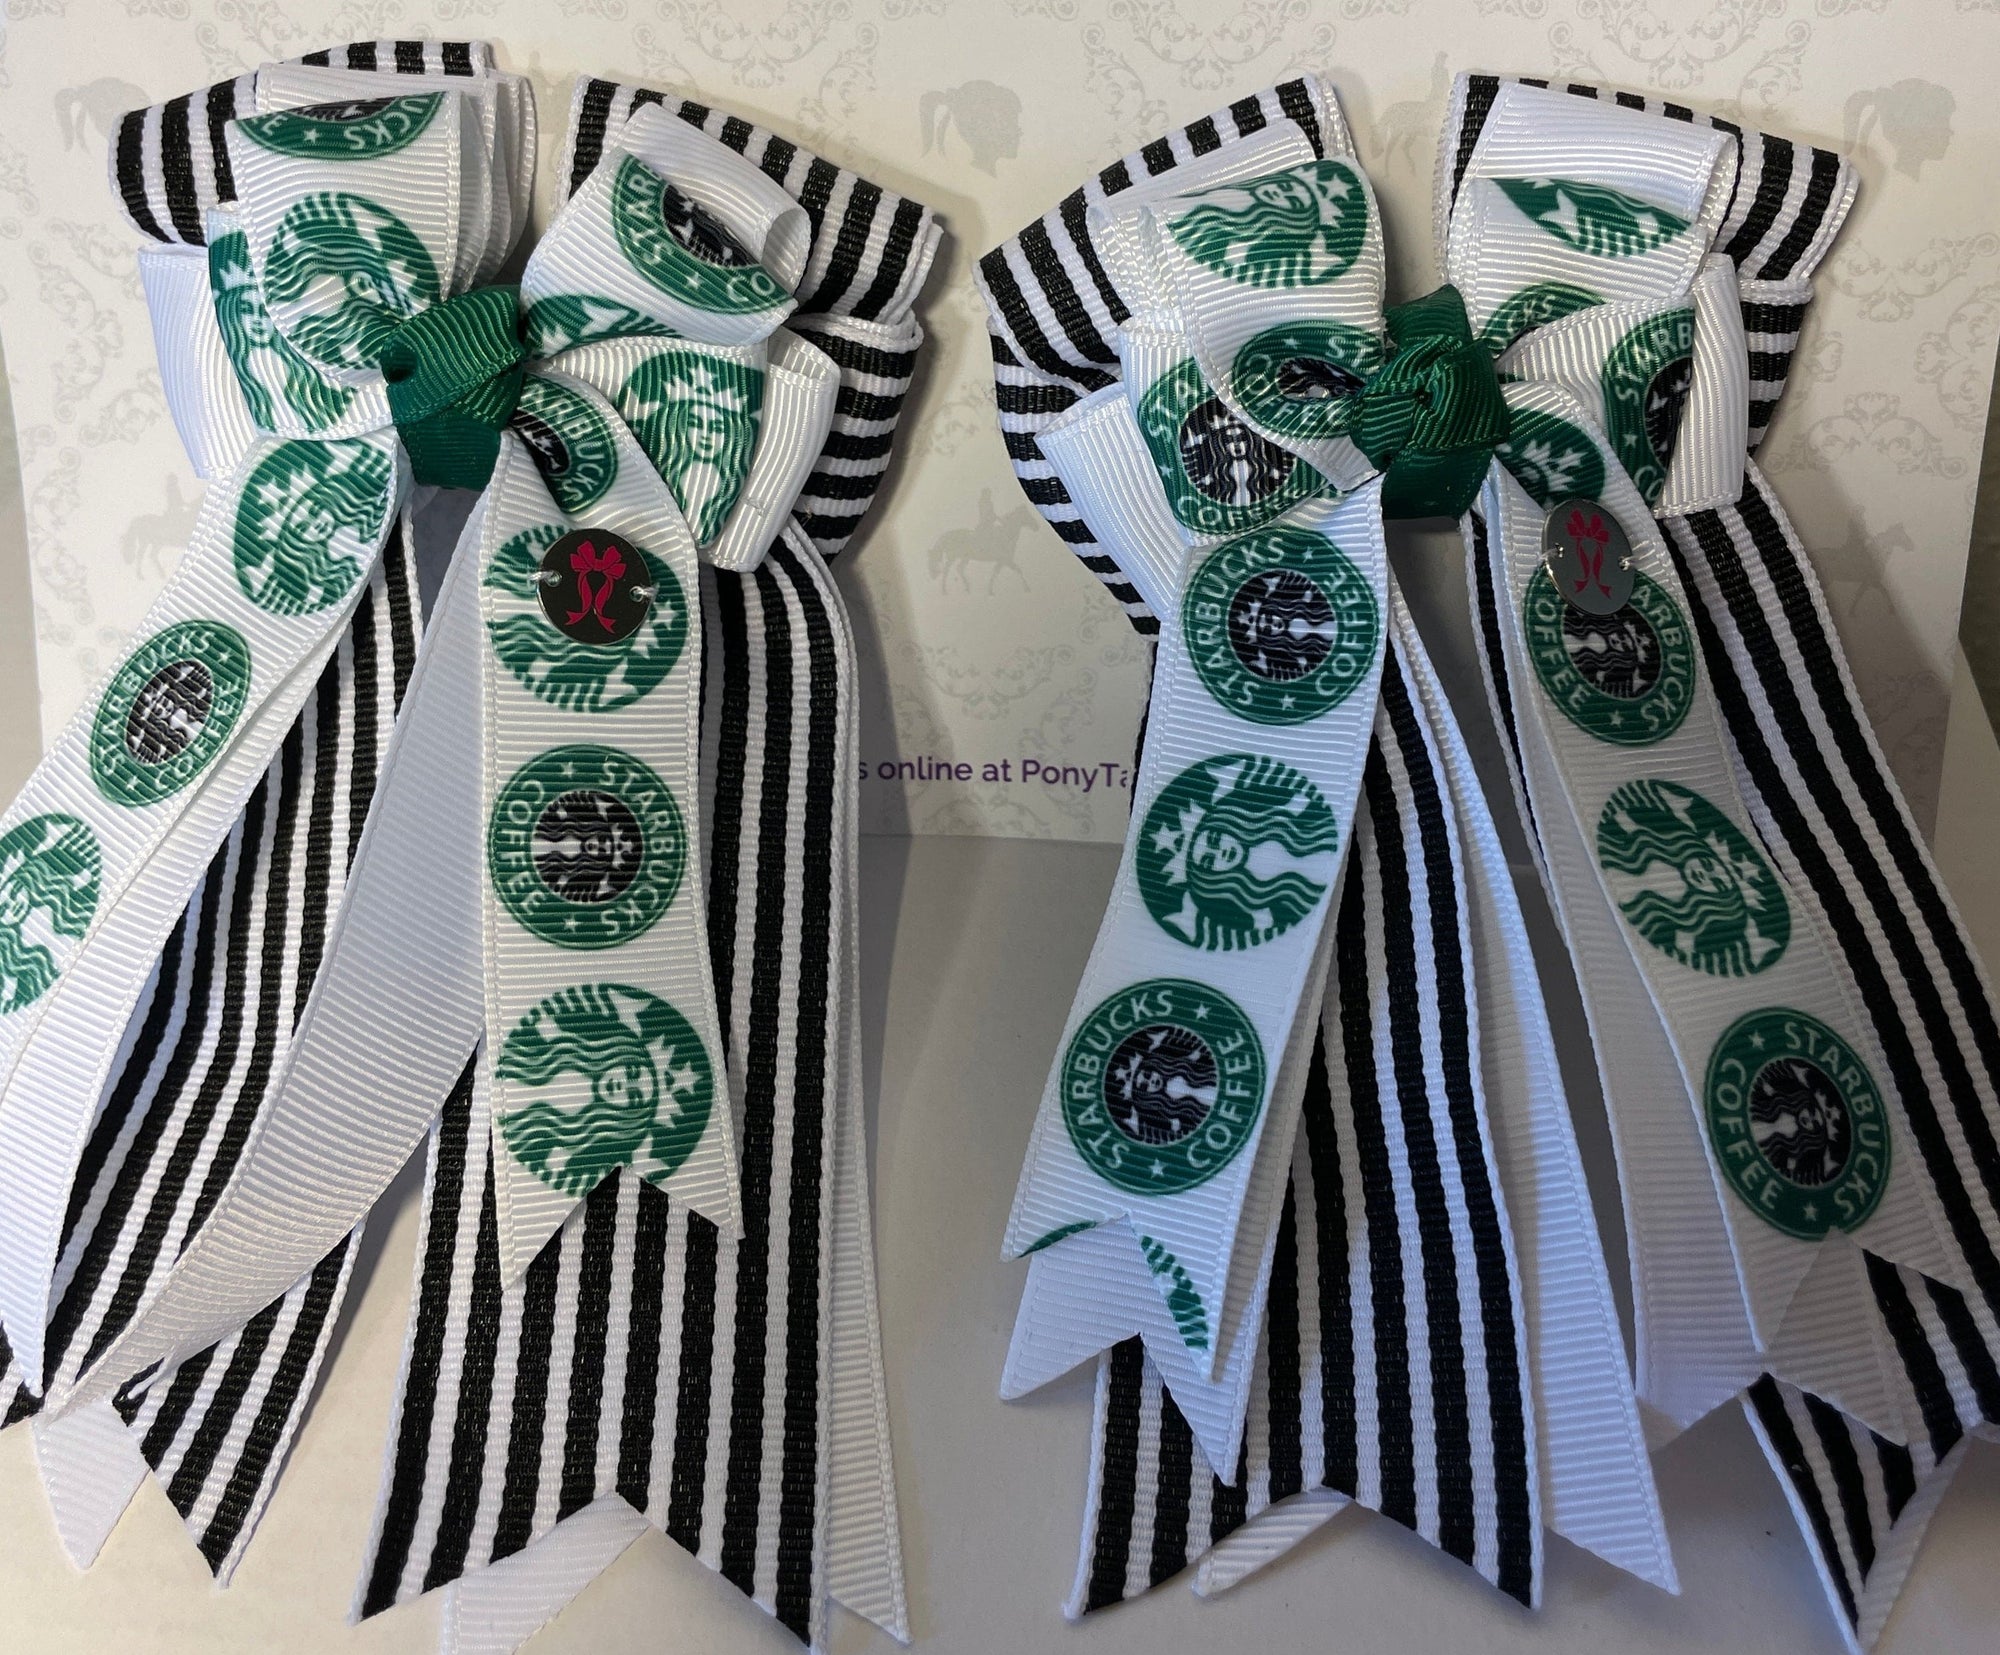 PonyTail Bows 3" Tails Starbucks and Stripes PonyTail Bows equestrian team apparel online tack store mobile tack store custom farm apparel custom show stable clothing equestrian lifestyle horse show clothing riding clothes PonyTail Bows | Equestrian Hair Accessories horses equestrian tack store